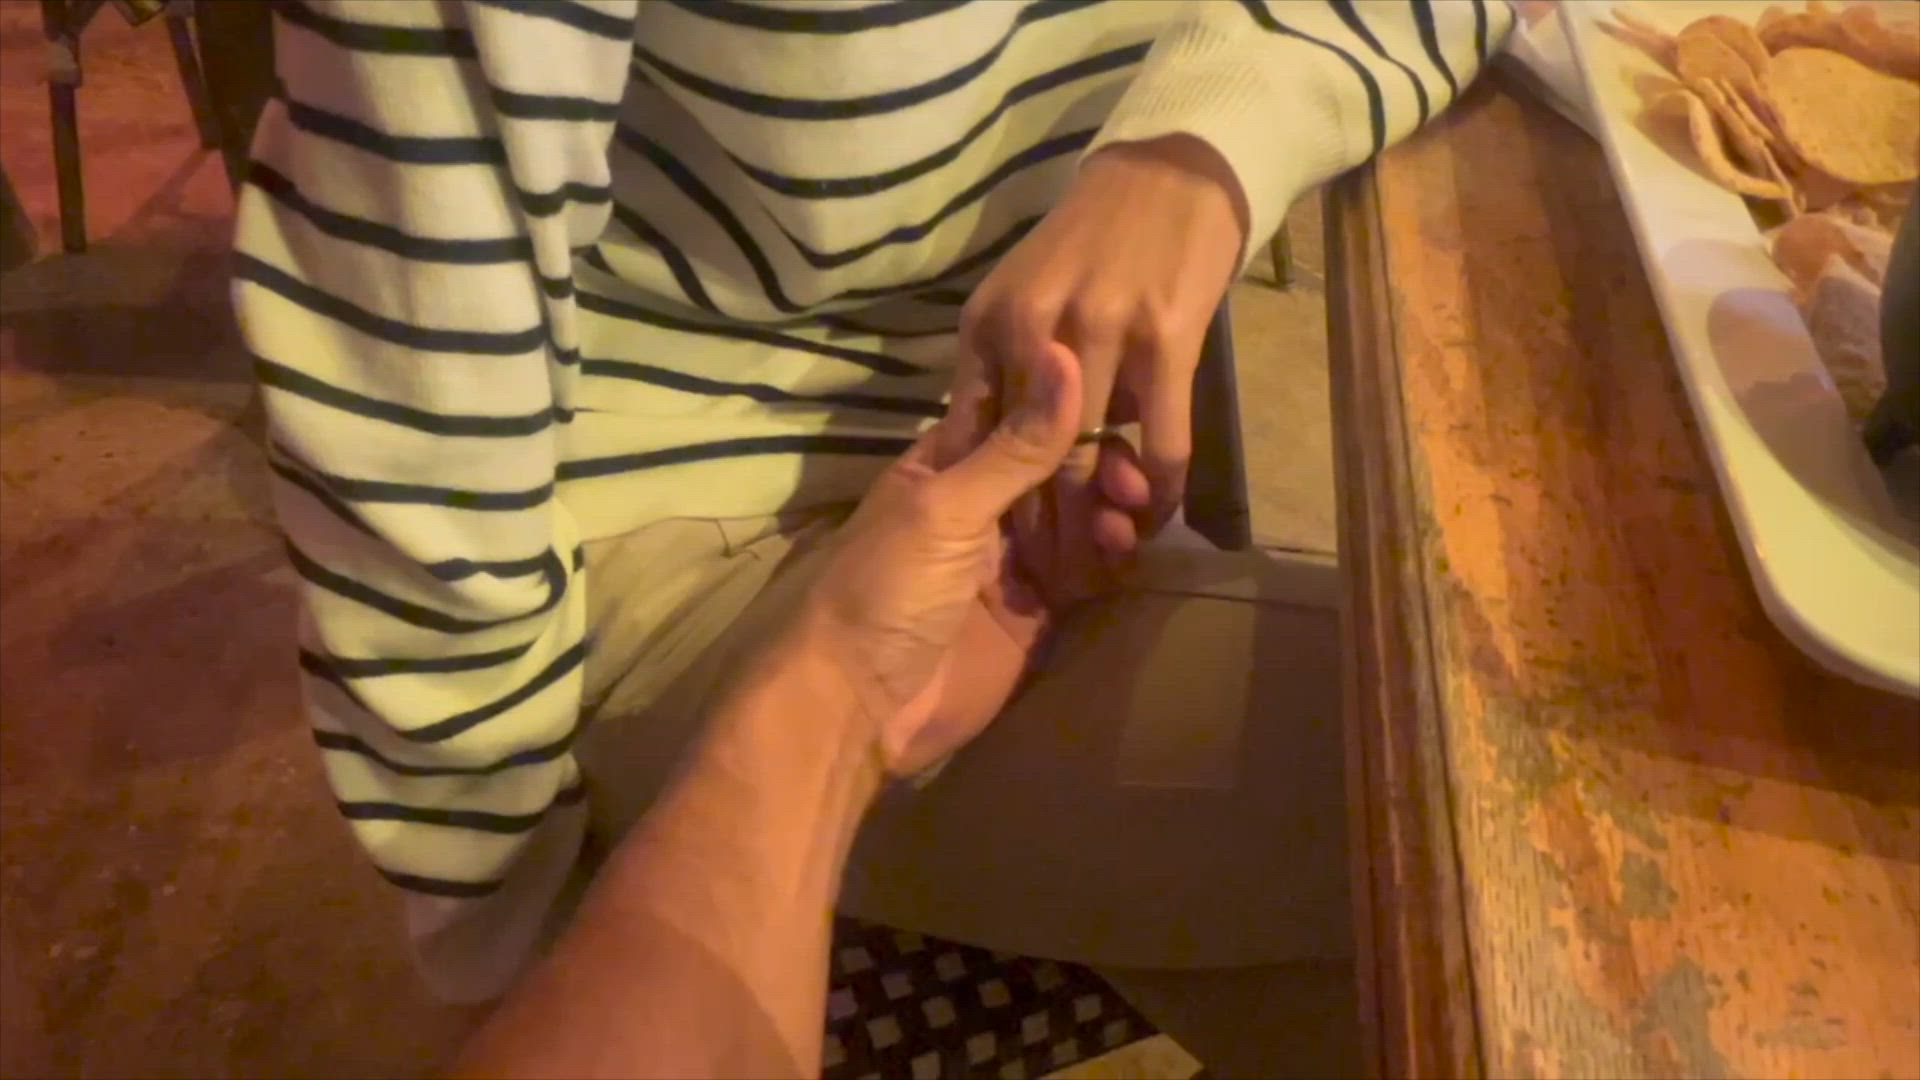 MILF porn video with onlyfans model sprtpscrtthrowaway <strong>@hey_itsmei</strong>